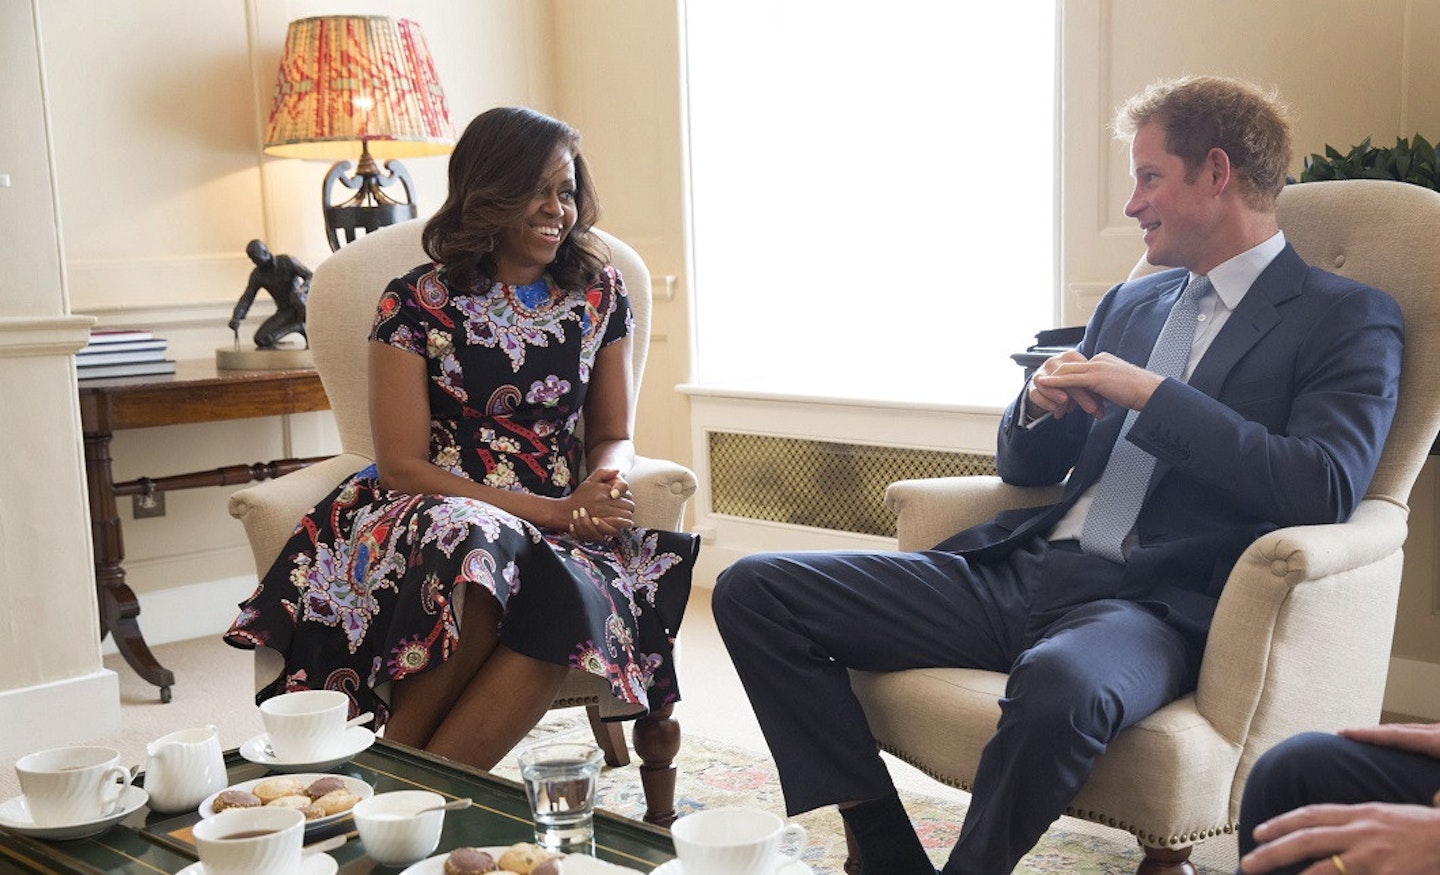 Michelle Obama at Kensington Palace with Prince Harry